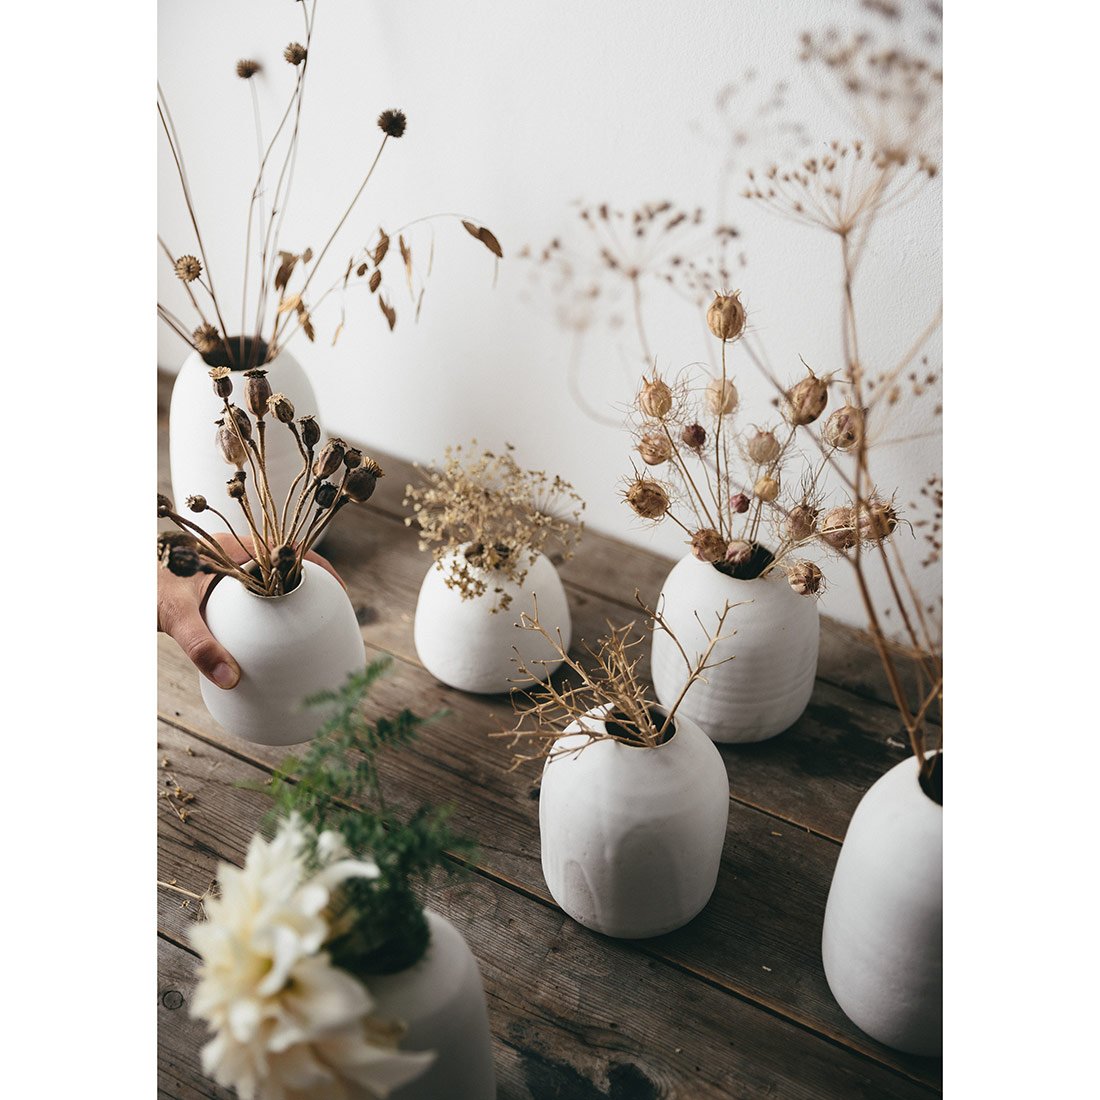 artificial flowers with small ceramic vase